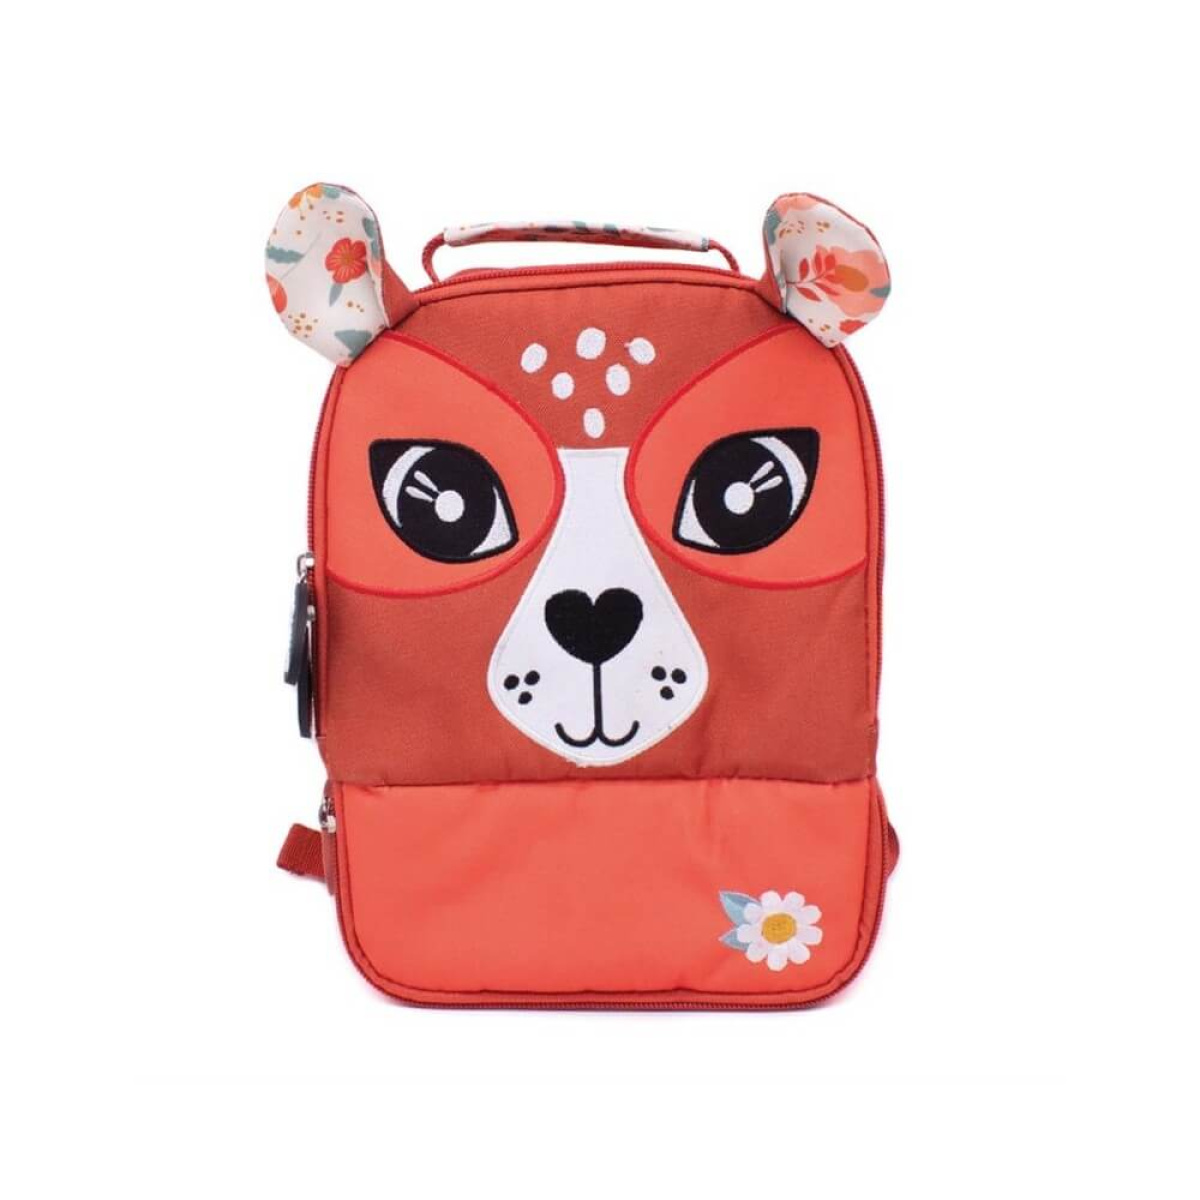 picnic-backpack-lunch-box-melimelos-the-deer